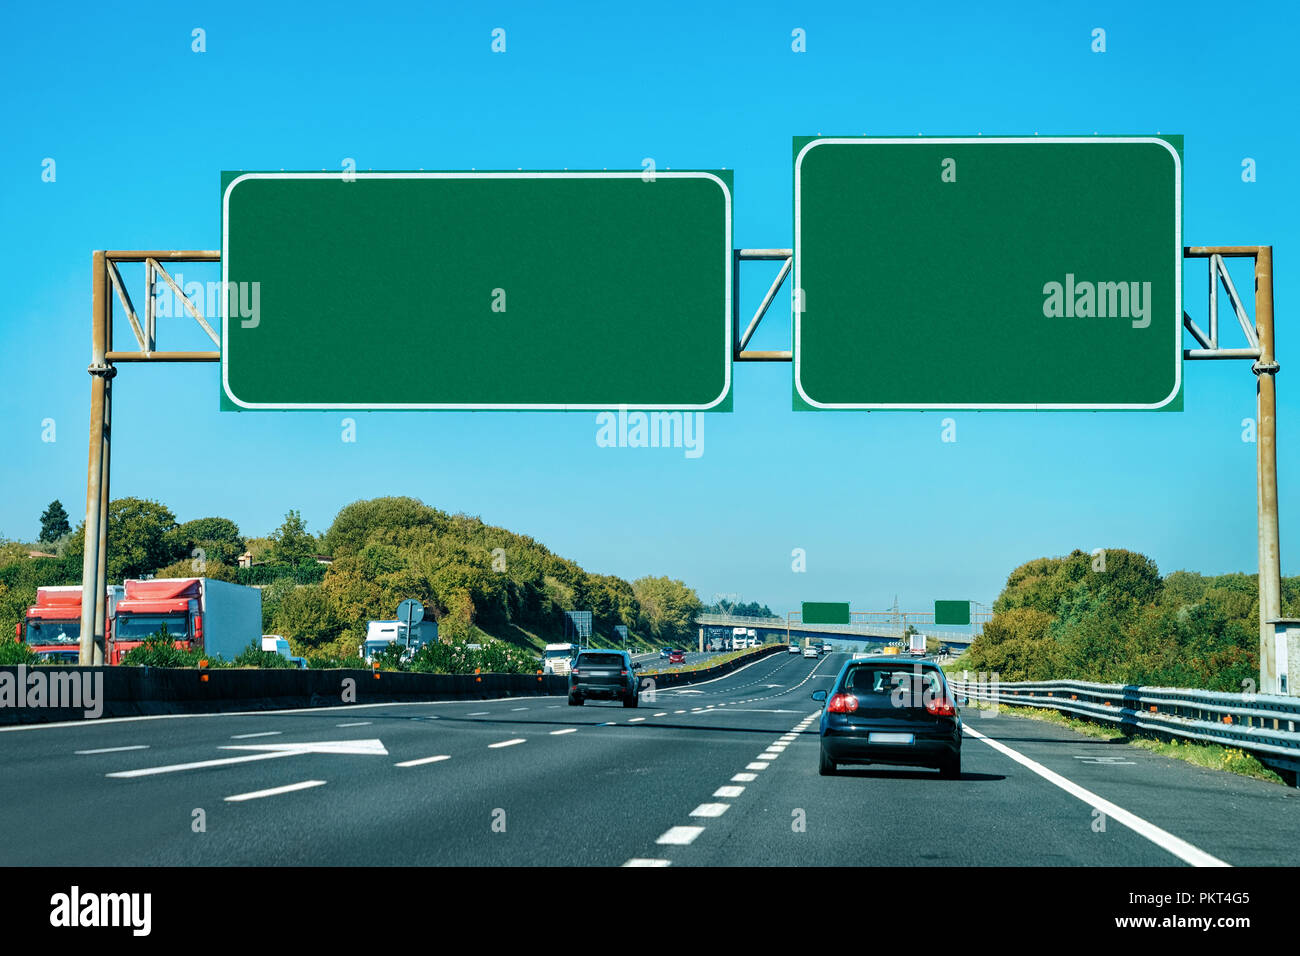 Car And Empty Green Traffic Signs On The Road In Italy Stock Photo Alamy